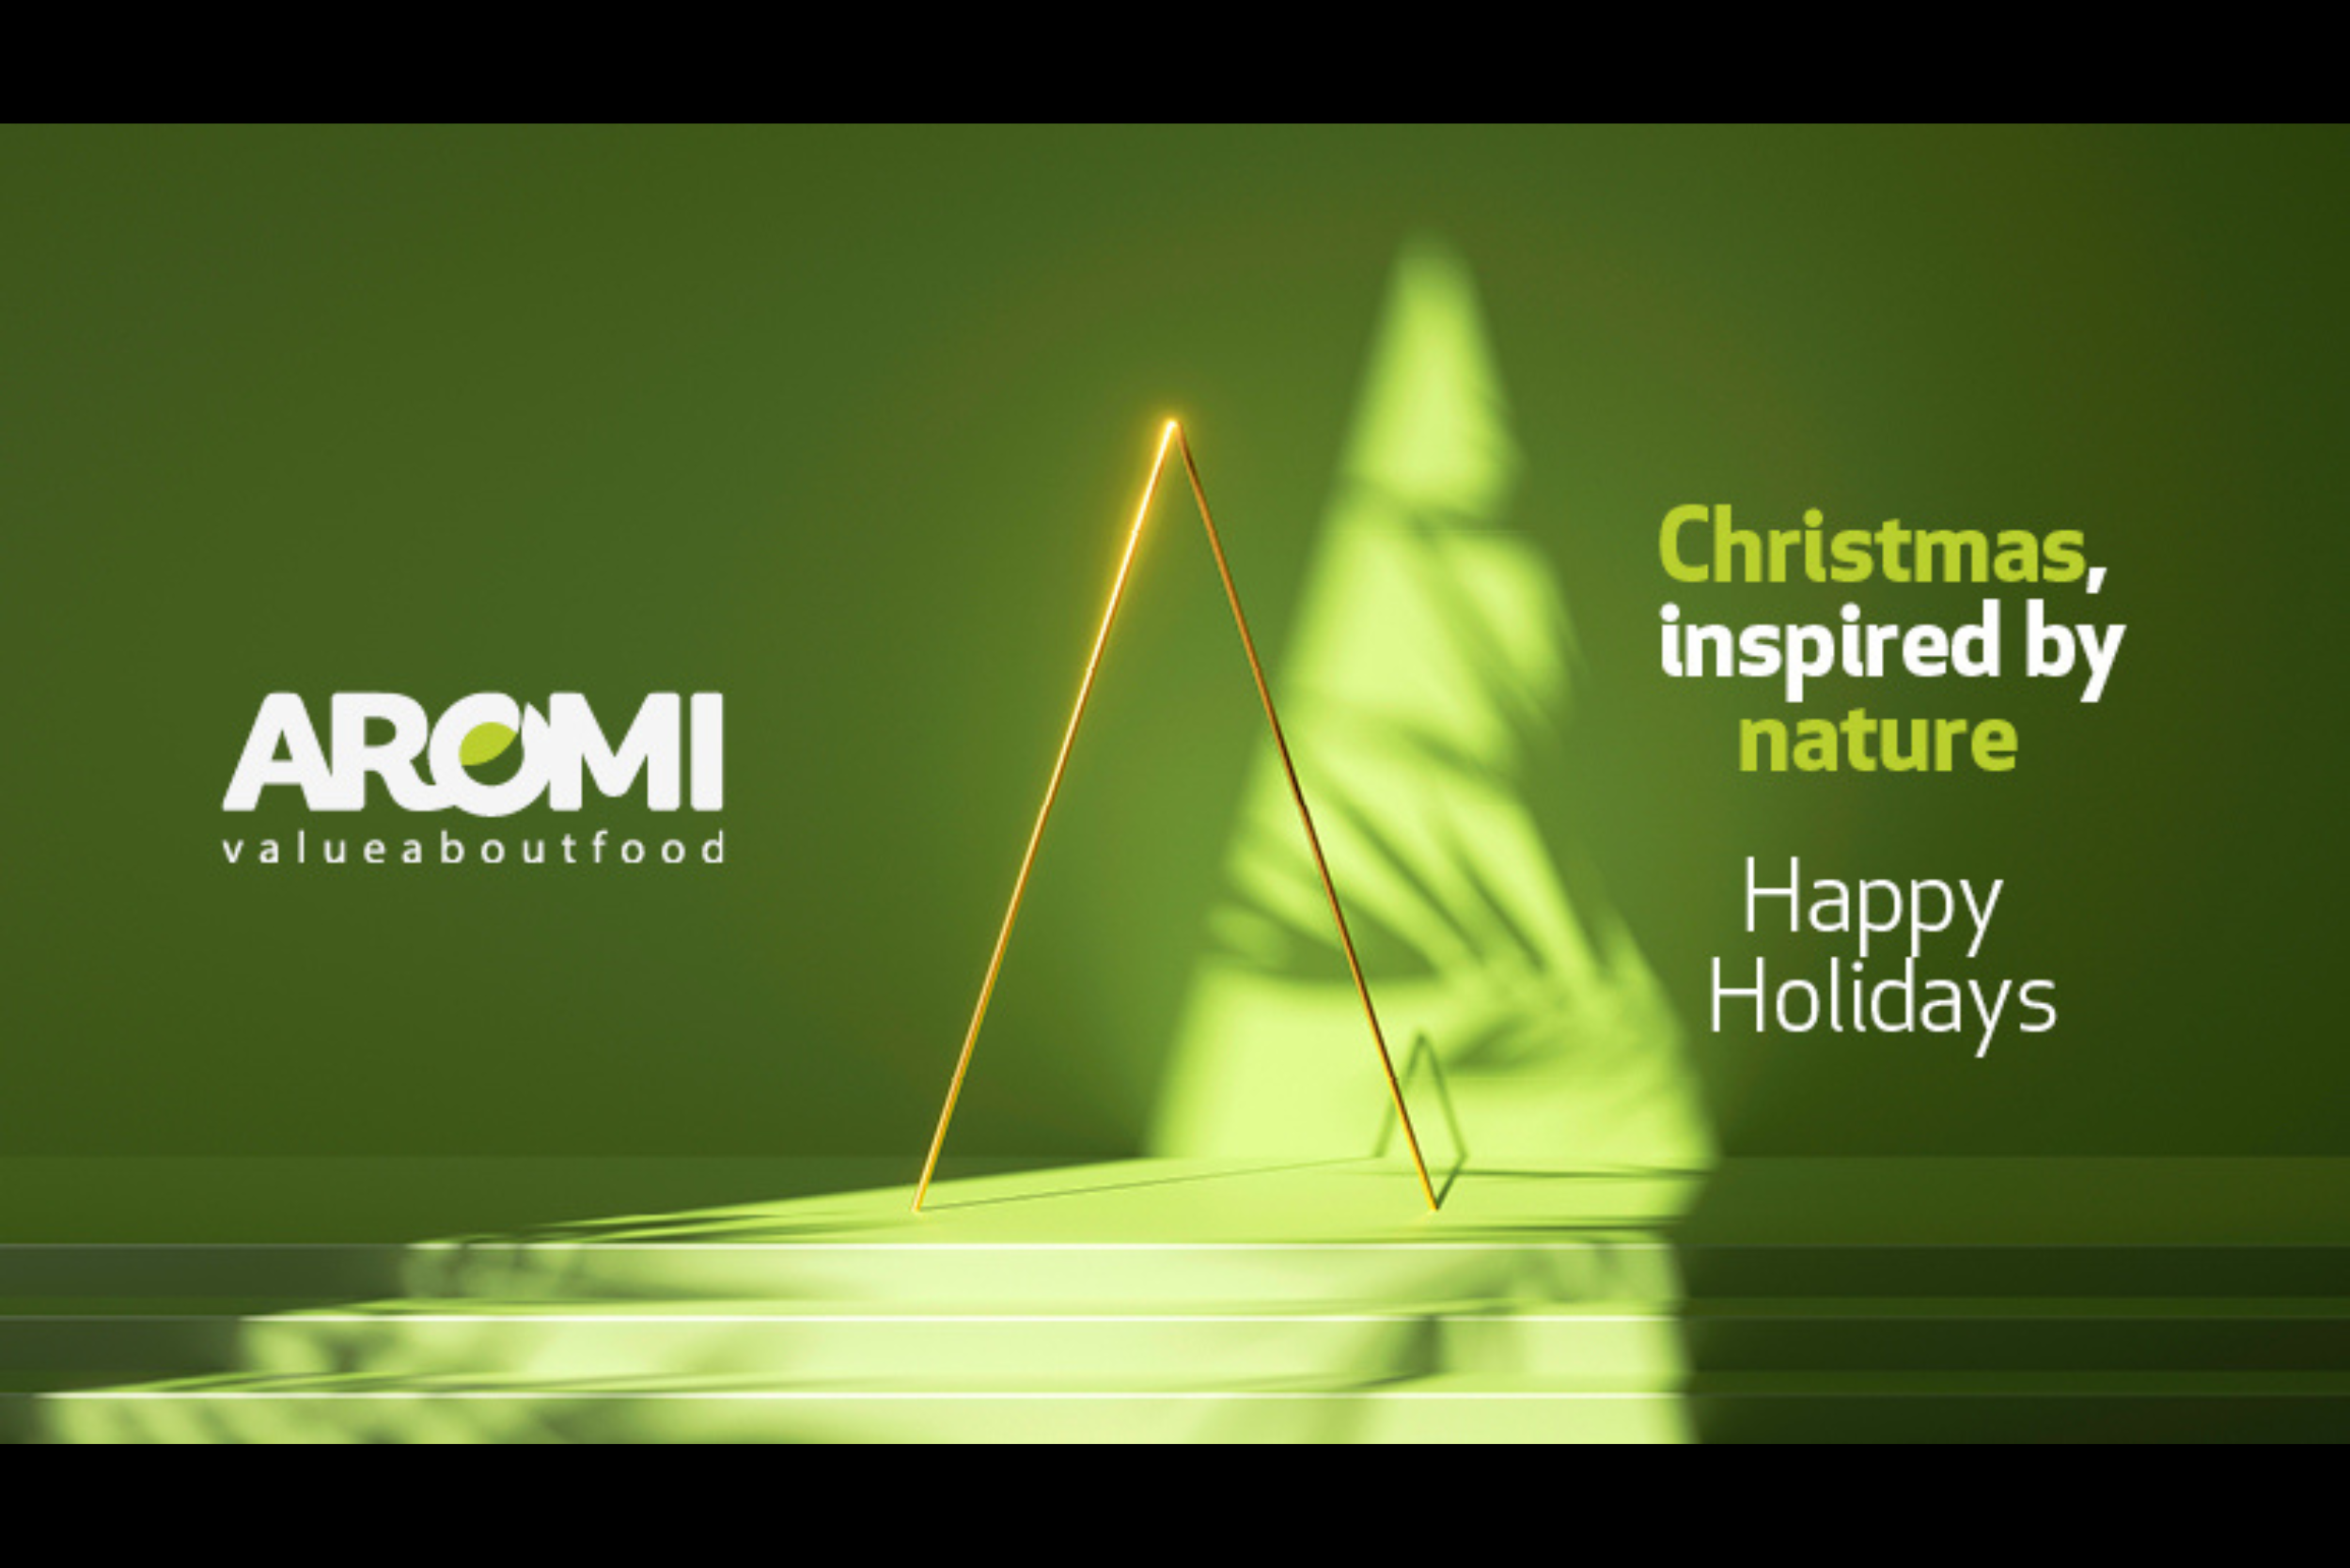 AROMI’s Christmas, </br> inspired by Nature